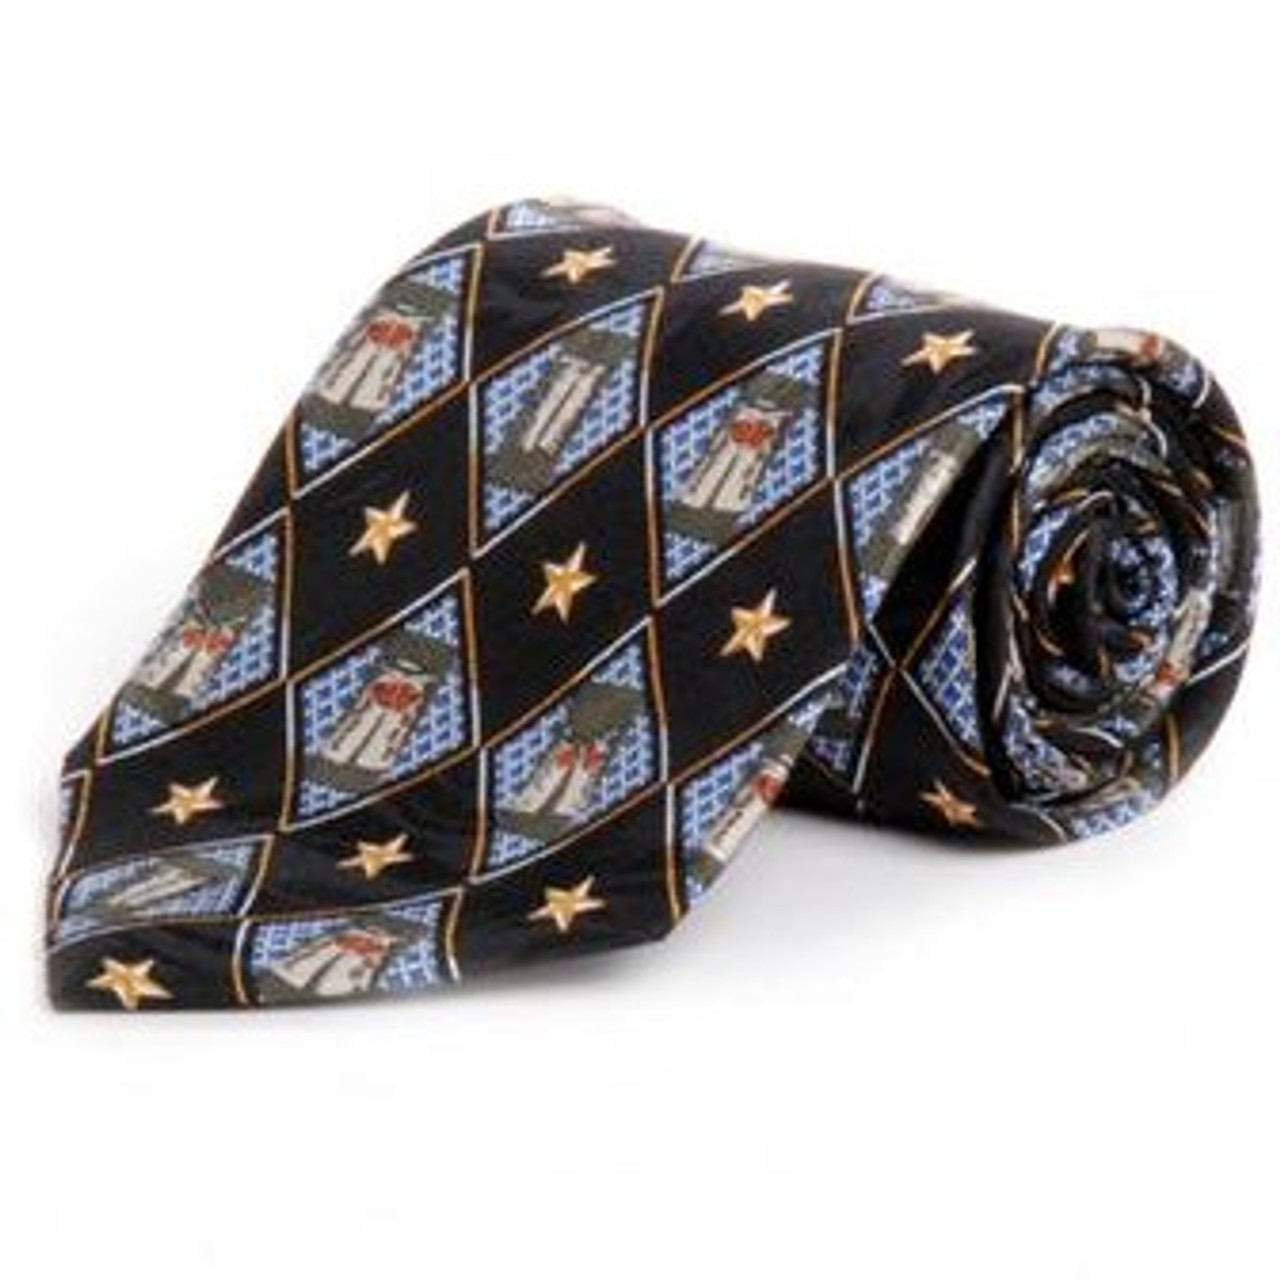 Circle S Mens Apparel - Dress Ties - Chaps and Stars - Black - Billy's  Western Wear